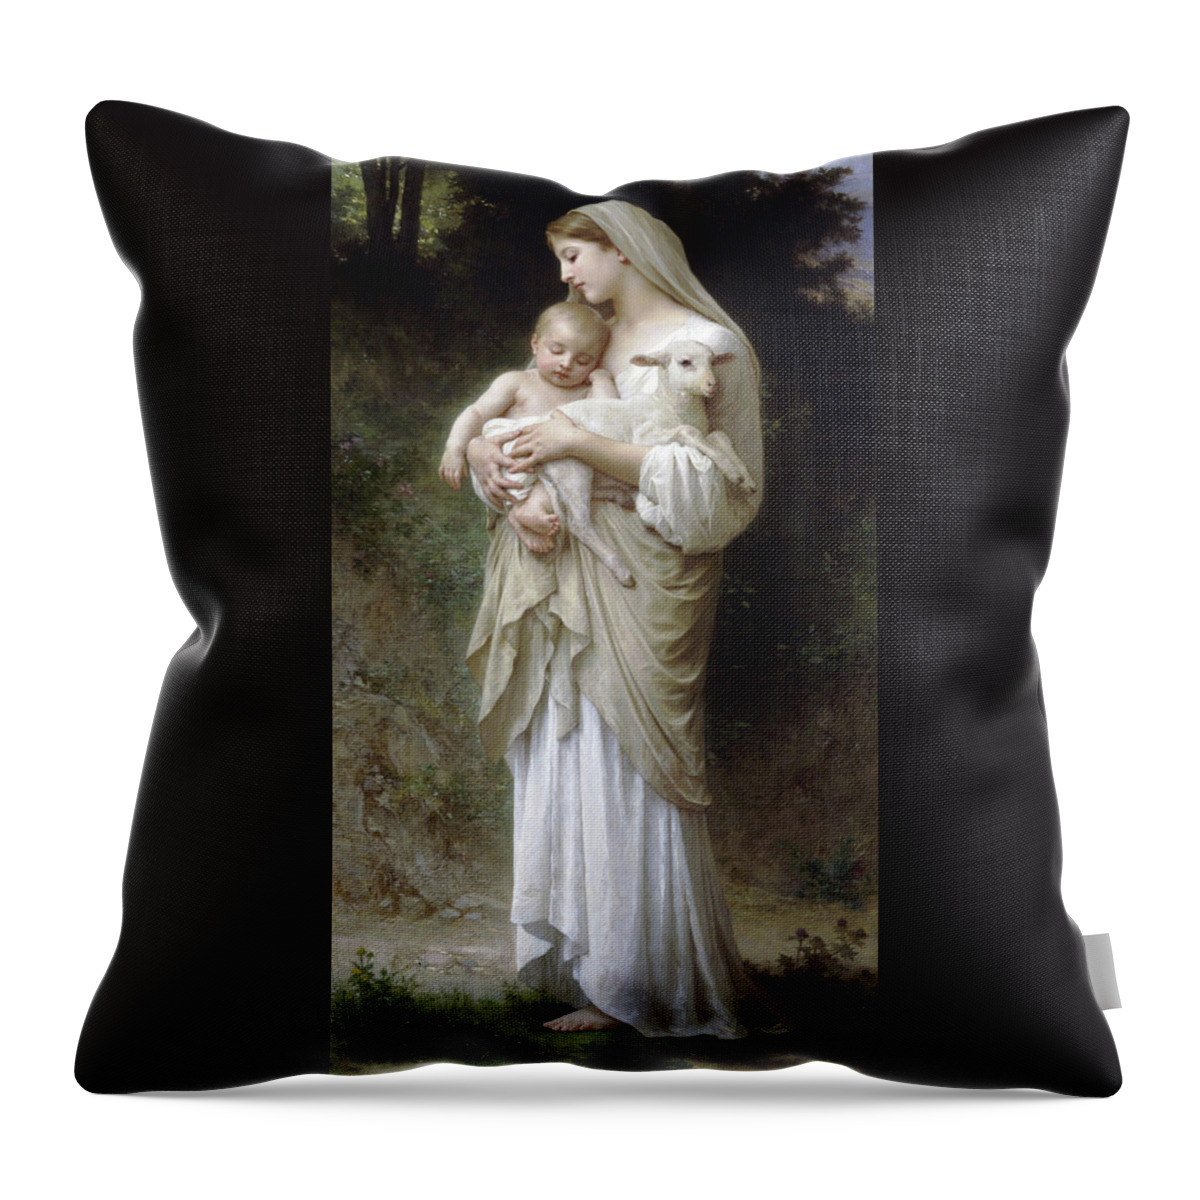 L'innocence Throw Pillow featuring the painting Adolphe Bouguereau by MotionAge Designs